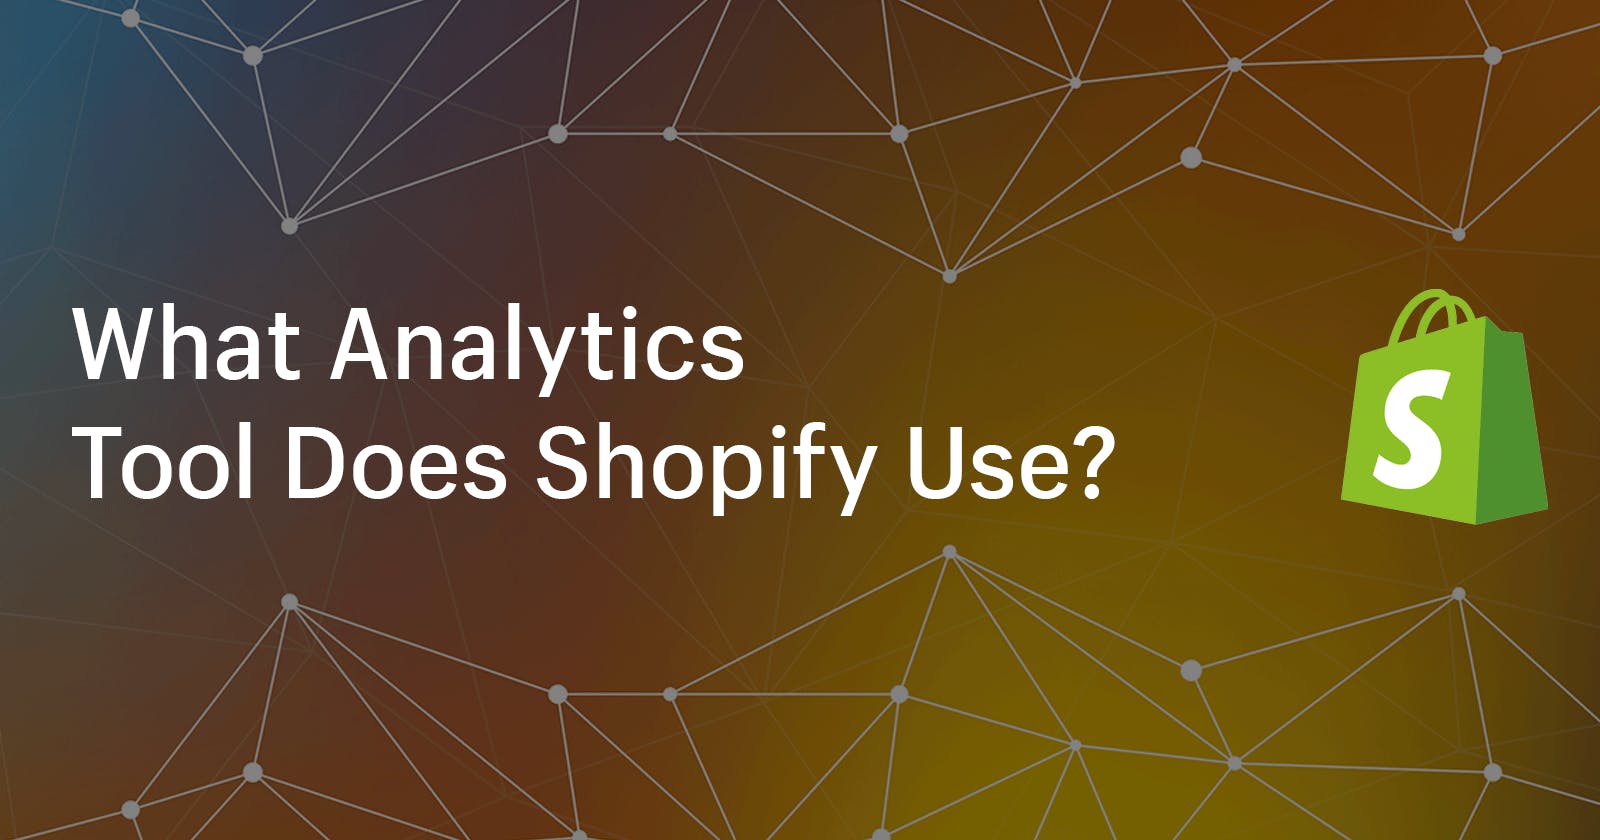 What Analytics Tool Does Shopify Use?